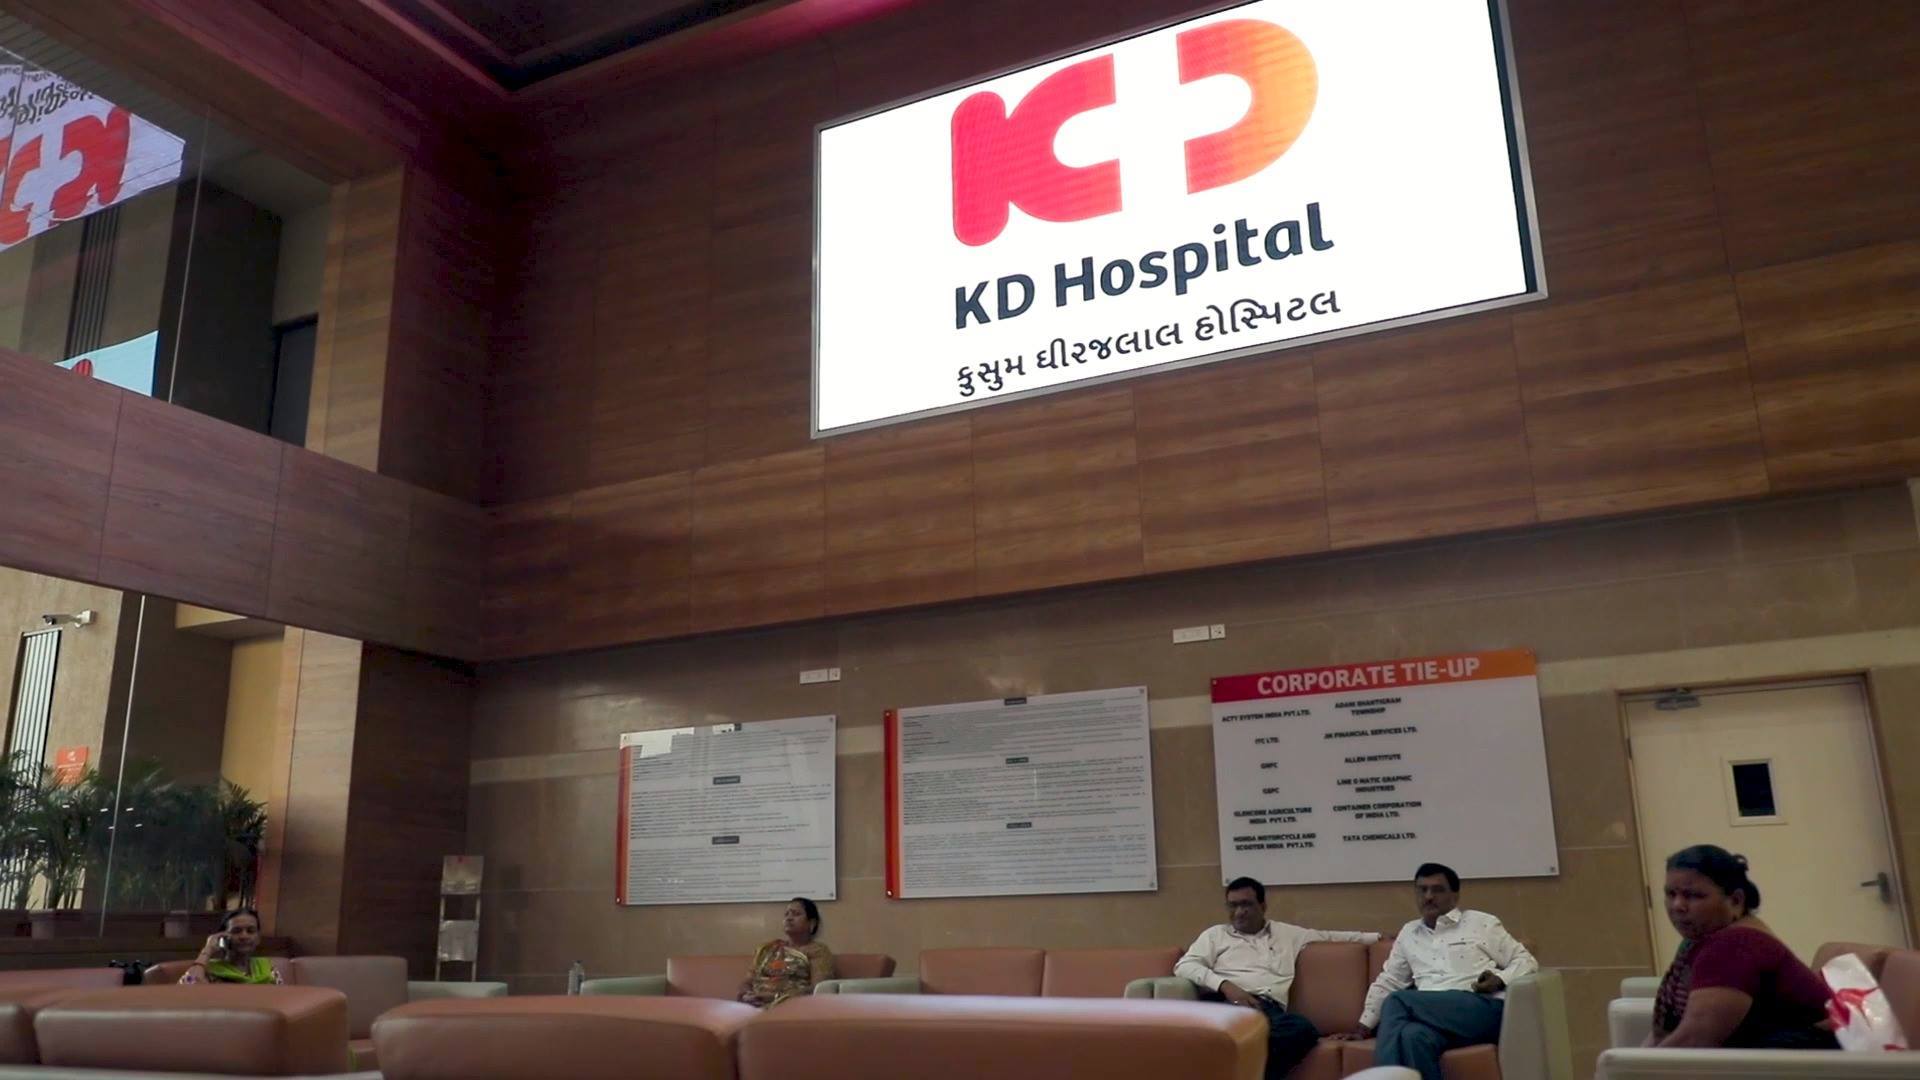 KD Hospital, Ahmedabad has state-of-the-art facilities & treatments at an affordable cost, encompassing a wide spectrum of accurate diagnostics and elegant therapeutics created on the philosophical edifice of the patient and ethical centricity ensuring humanistic dispensation.

#KDHospital #GoodHealth #Ahmedabad #Gujarat #India